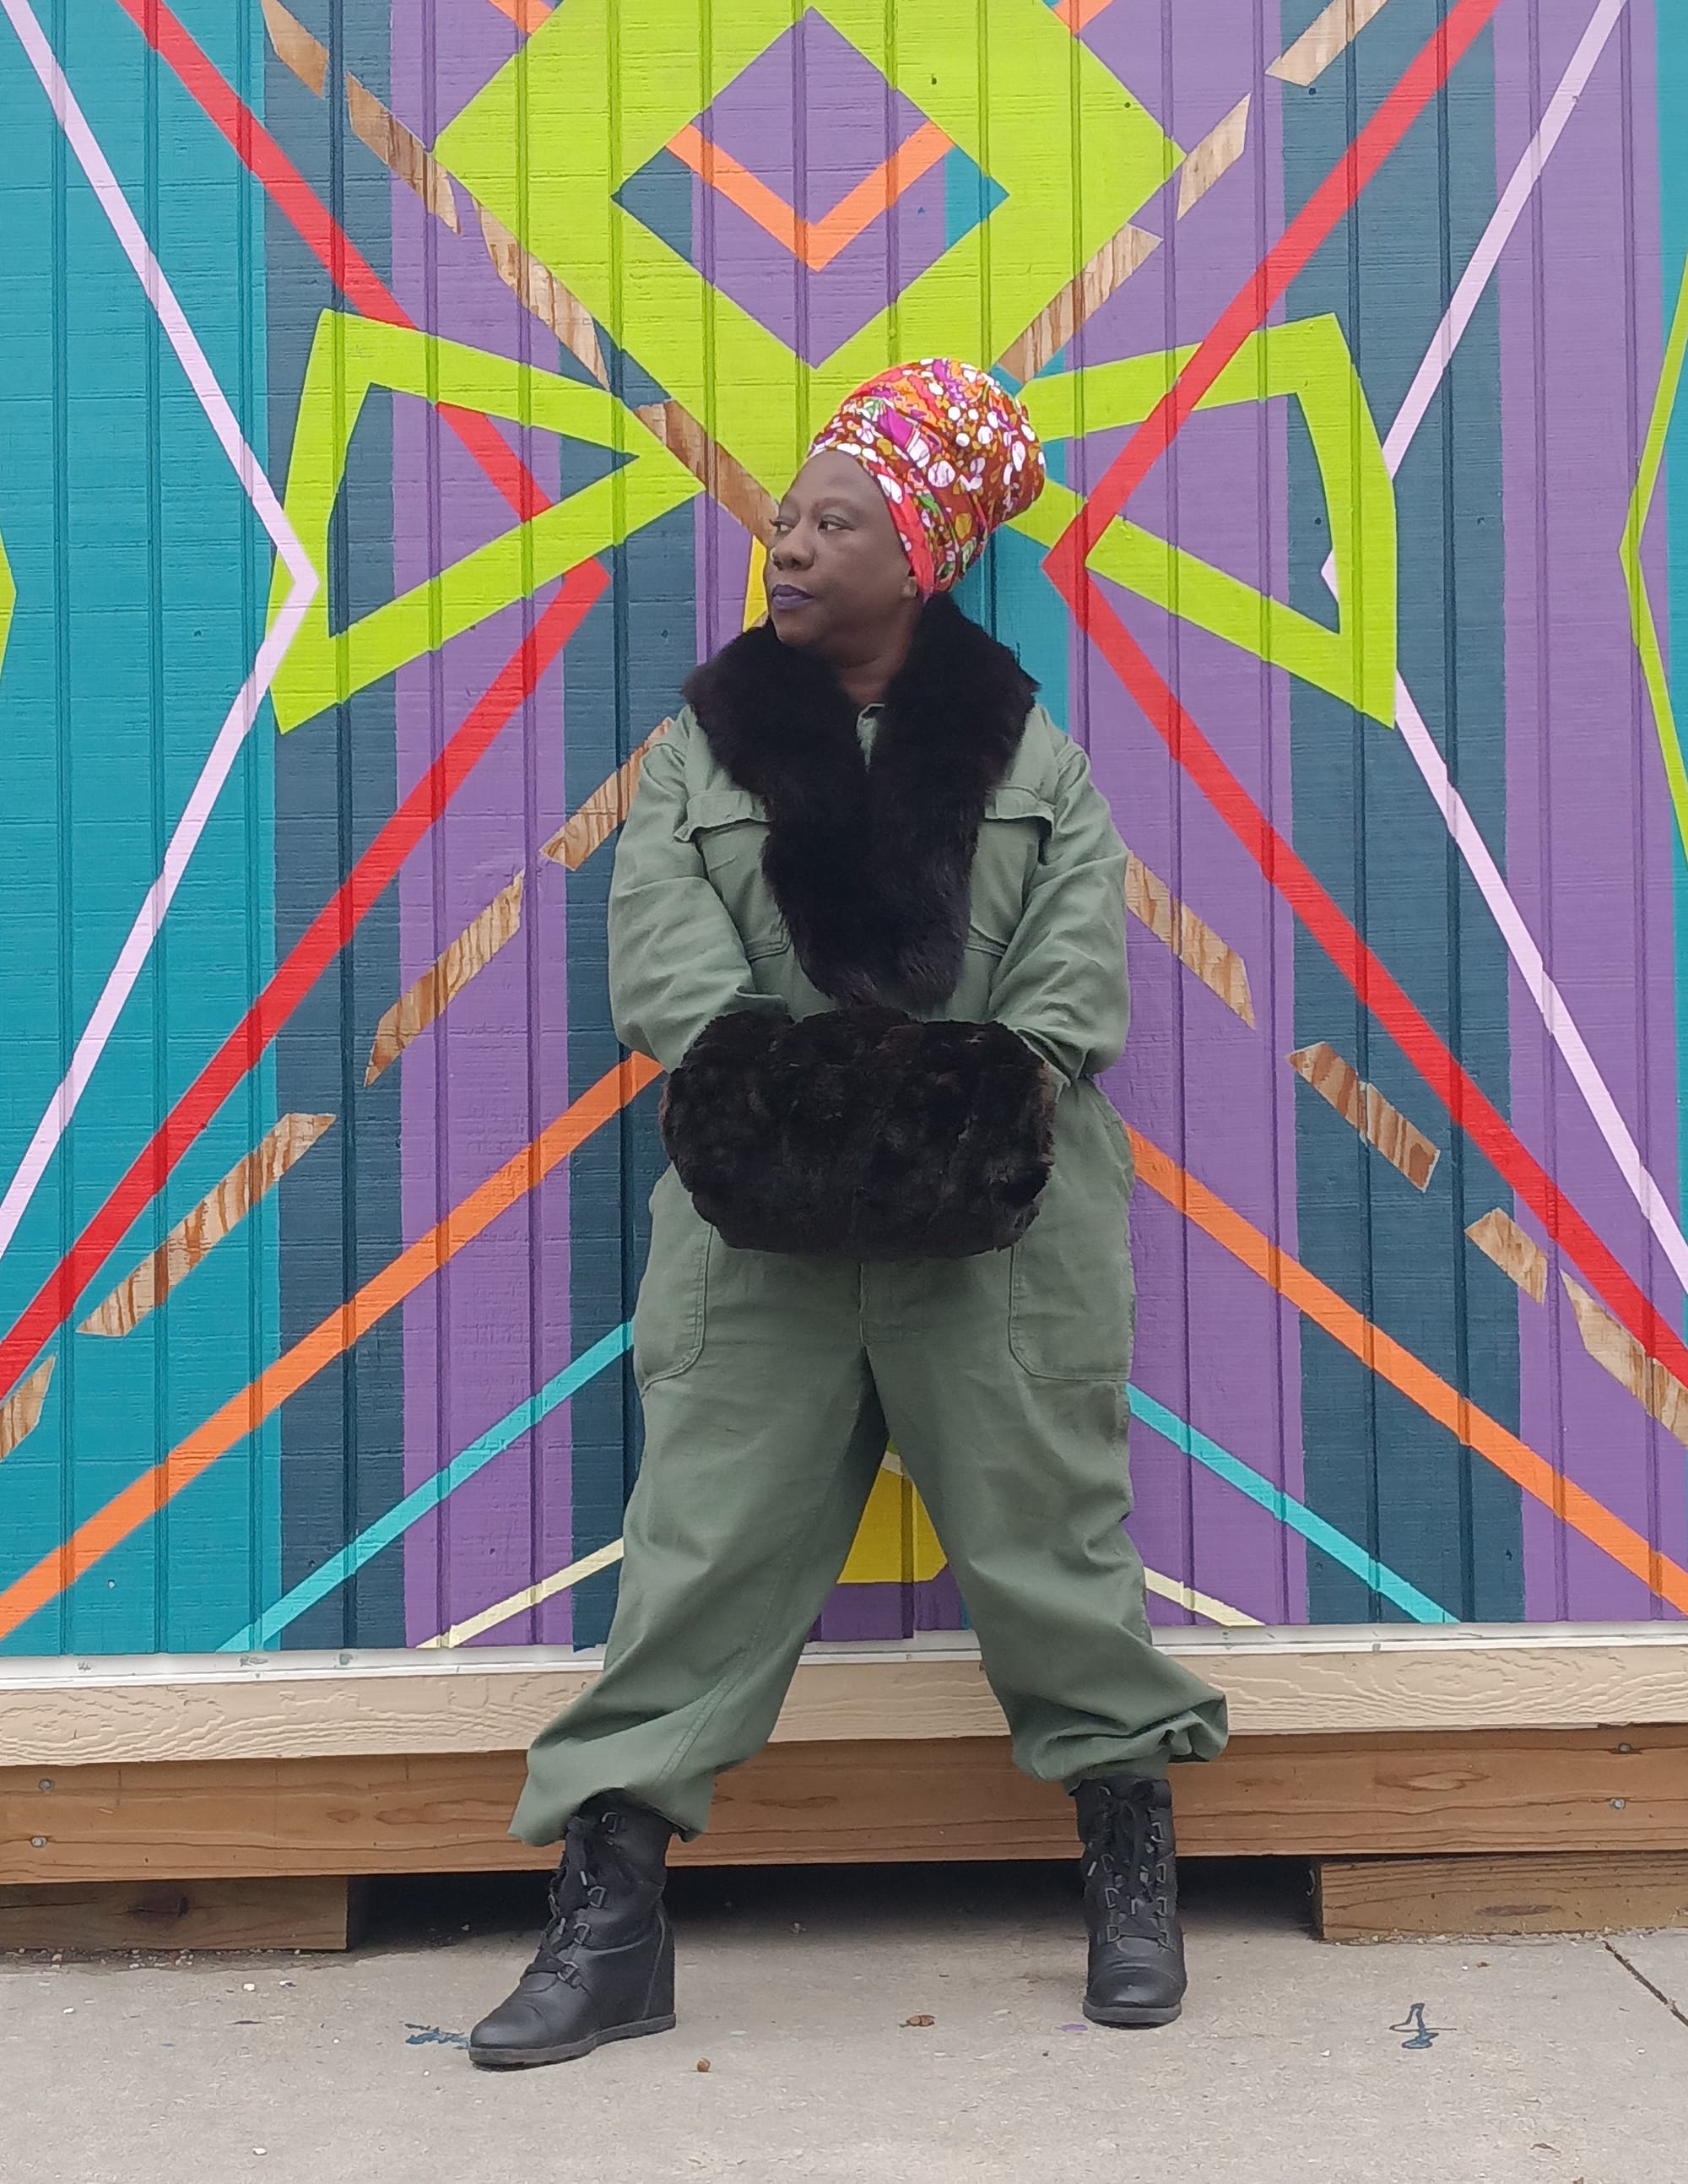 Celeste Butler wears a green jumpsuit and floral headwrap. She stands in front of a colorful wall outside.